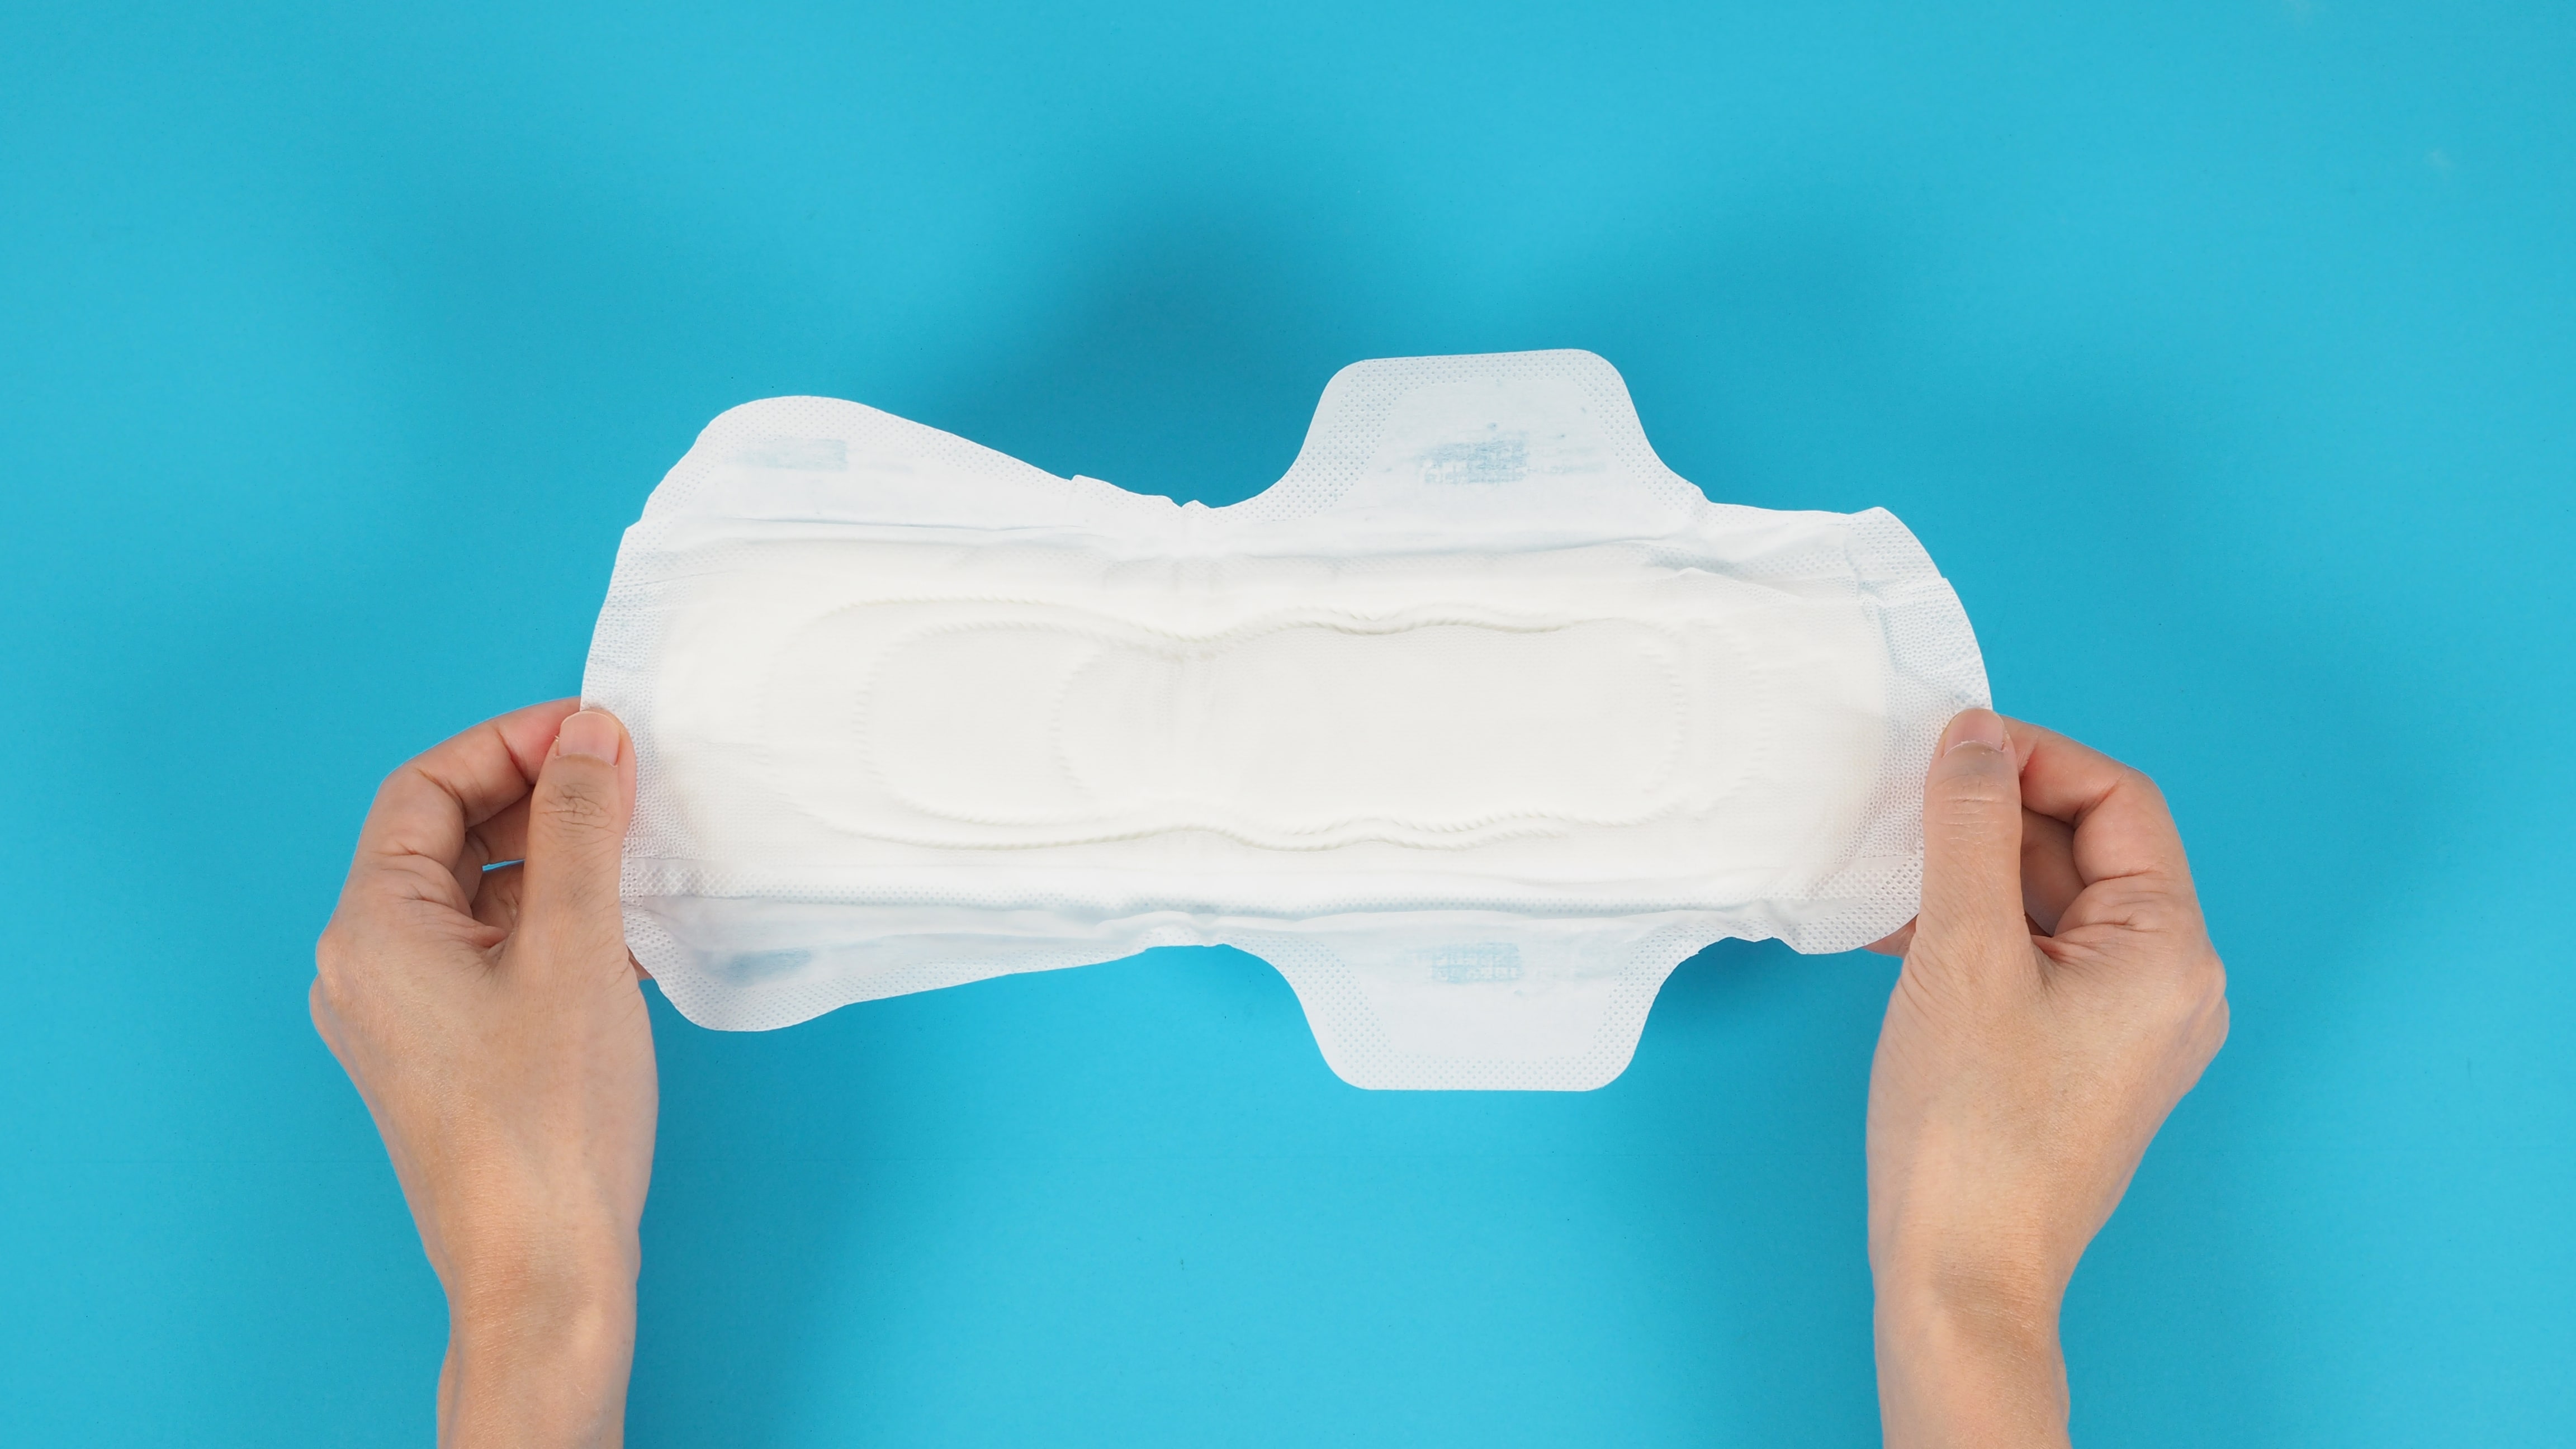 How Important is the Sanitary Napkin Size?